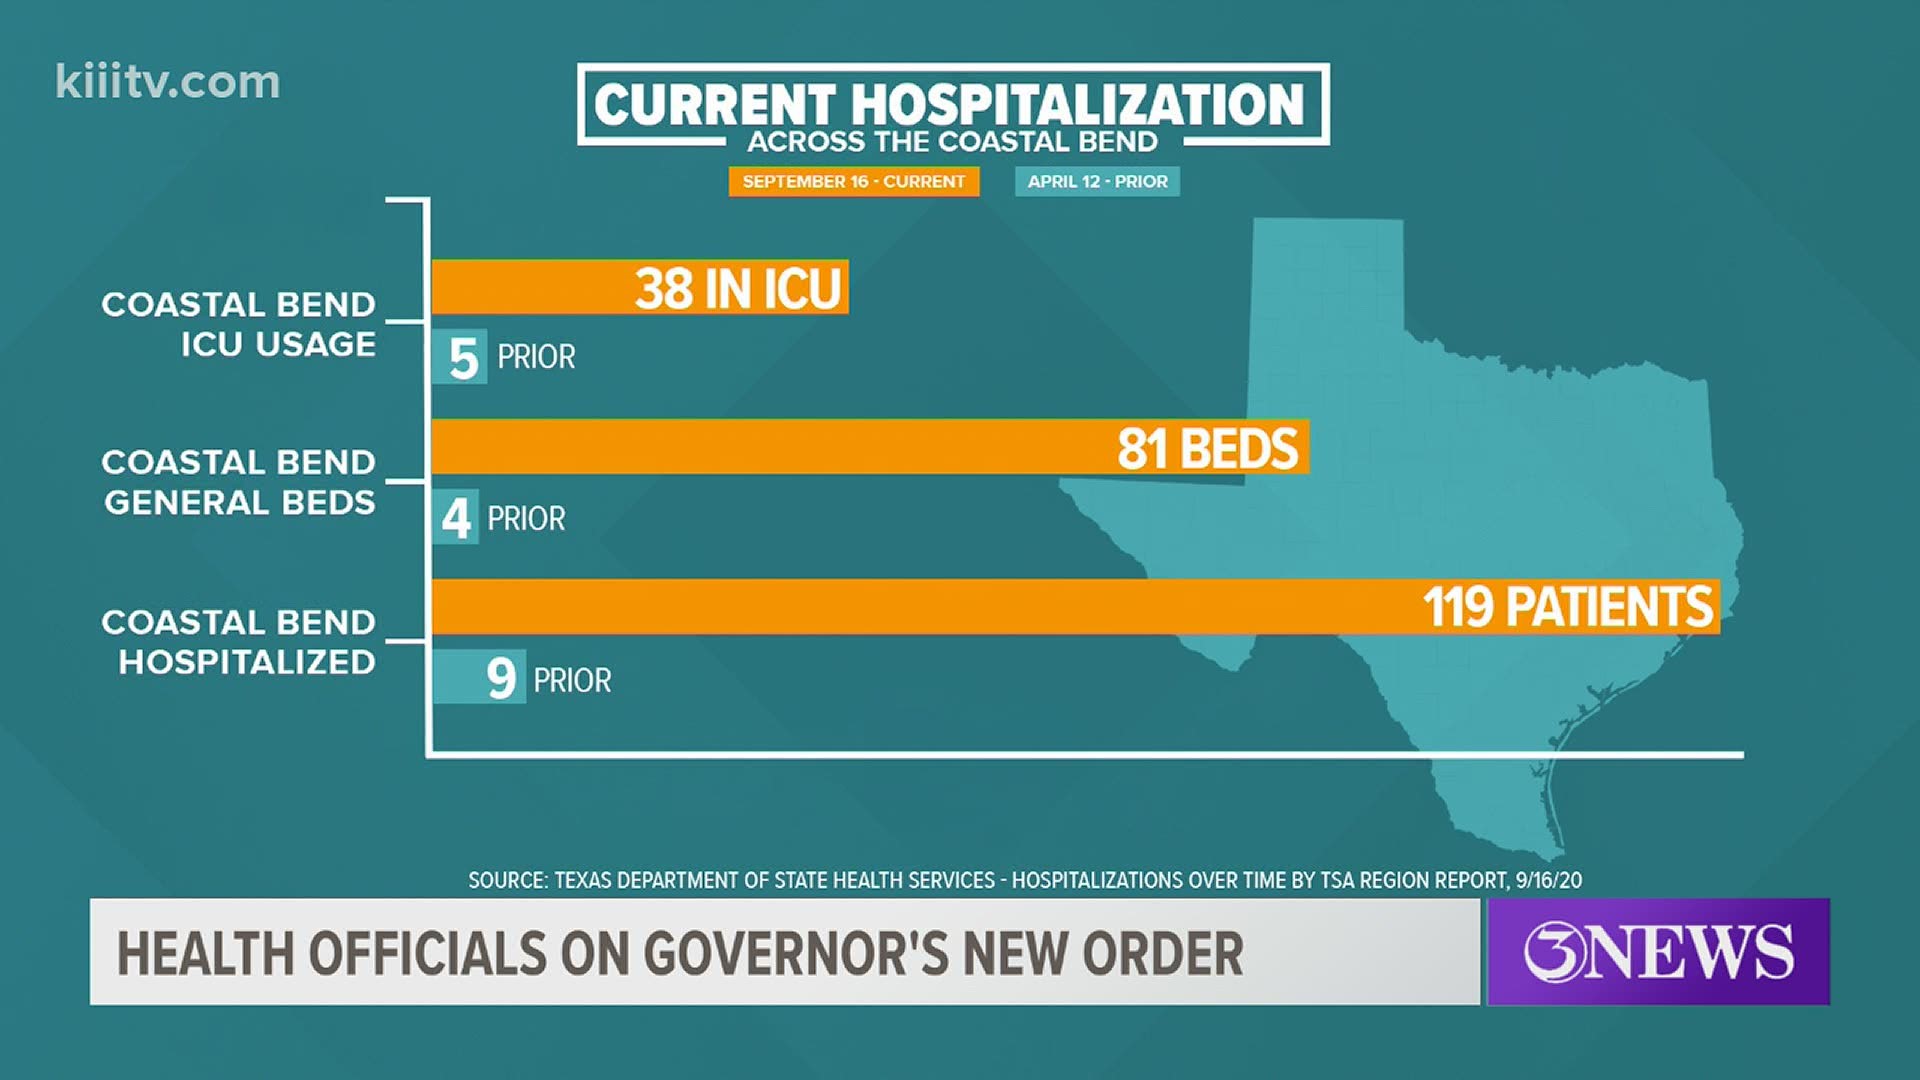 Governor Greg Abbott is allowing businesses to open at 75-percent of capacity after using COVID-19 hospitalization guidelines of 15-percent capacity.